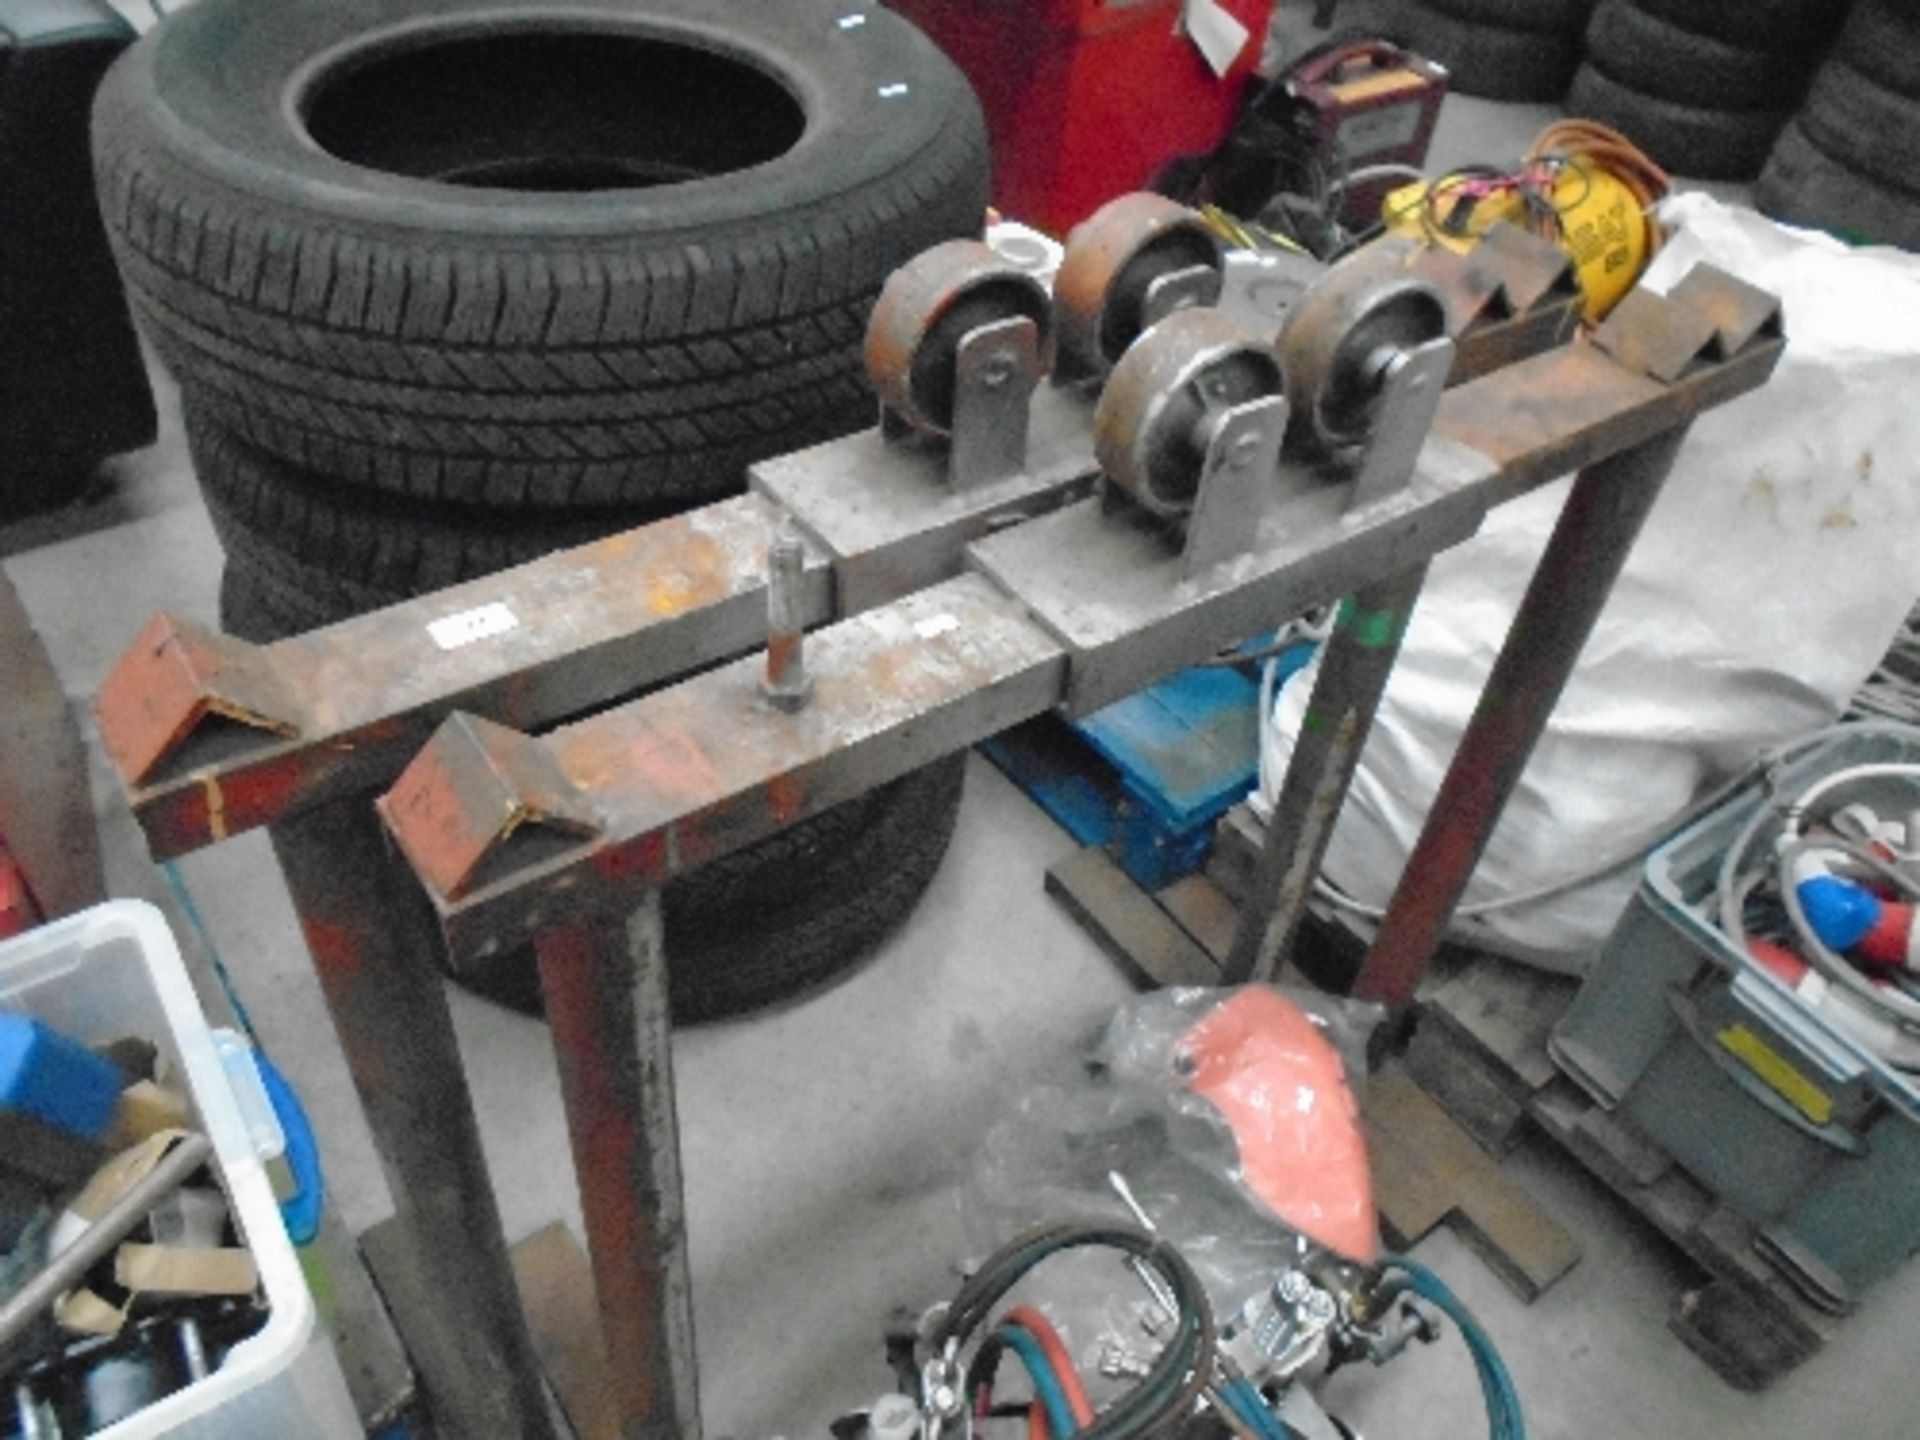 2 x metal trestles with rollers connected 100 x 110cm